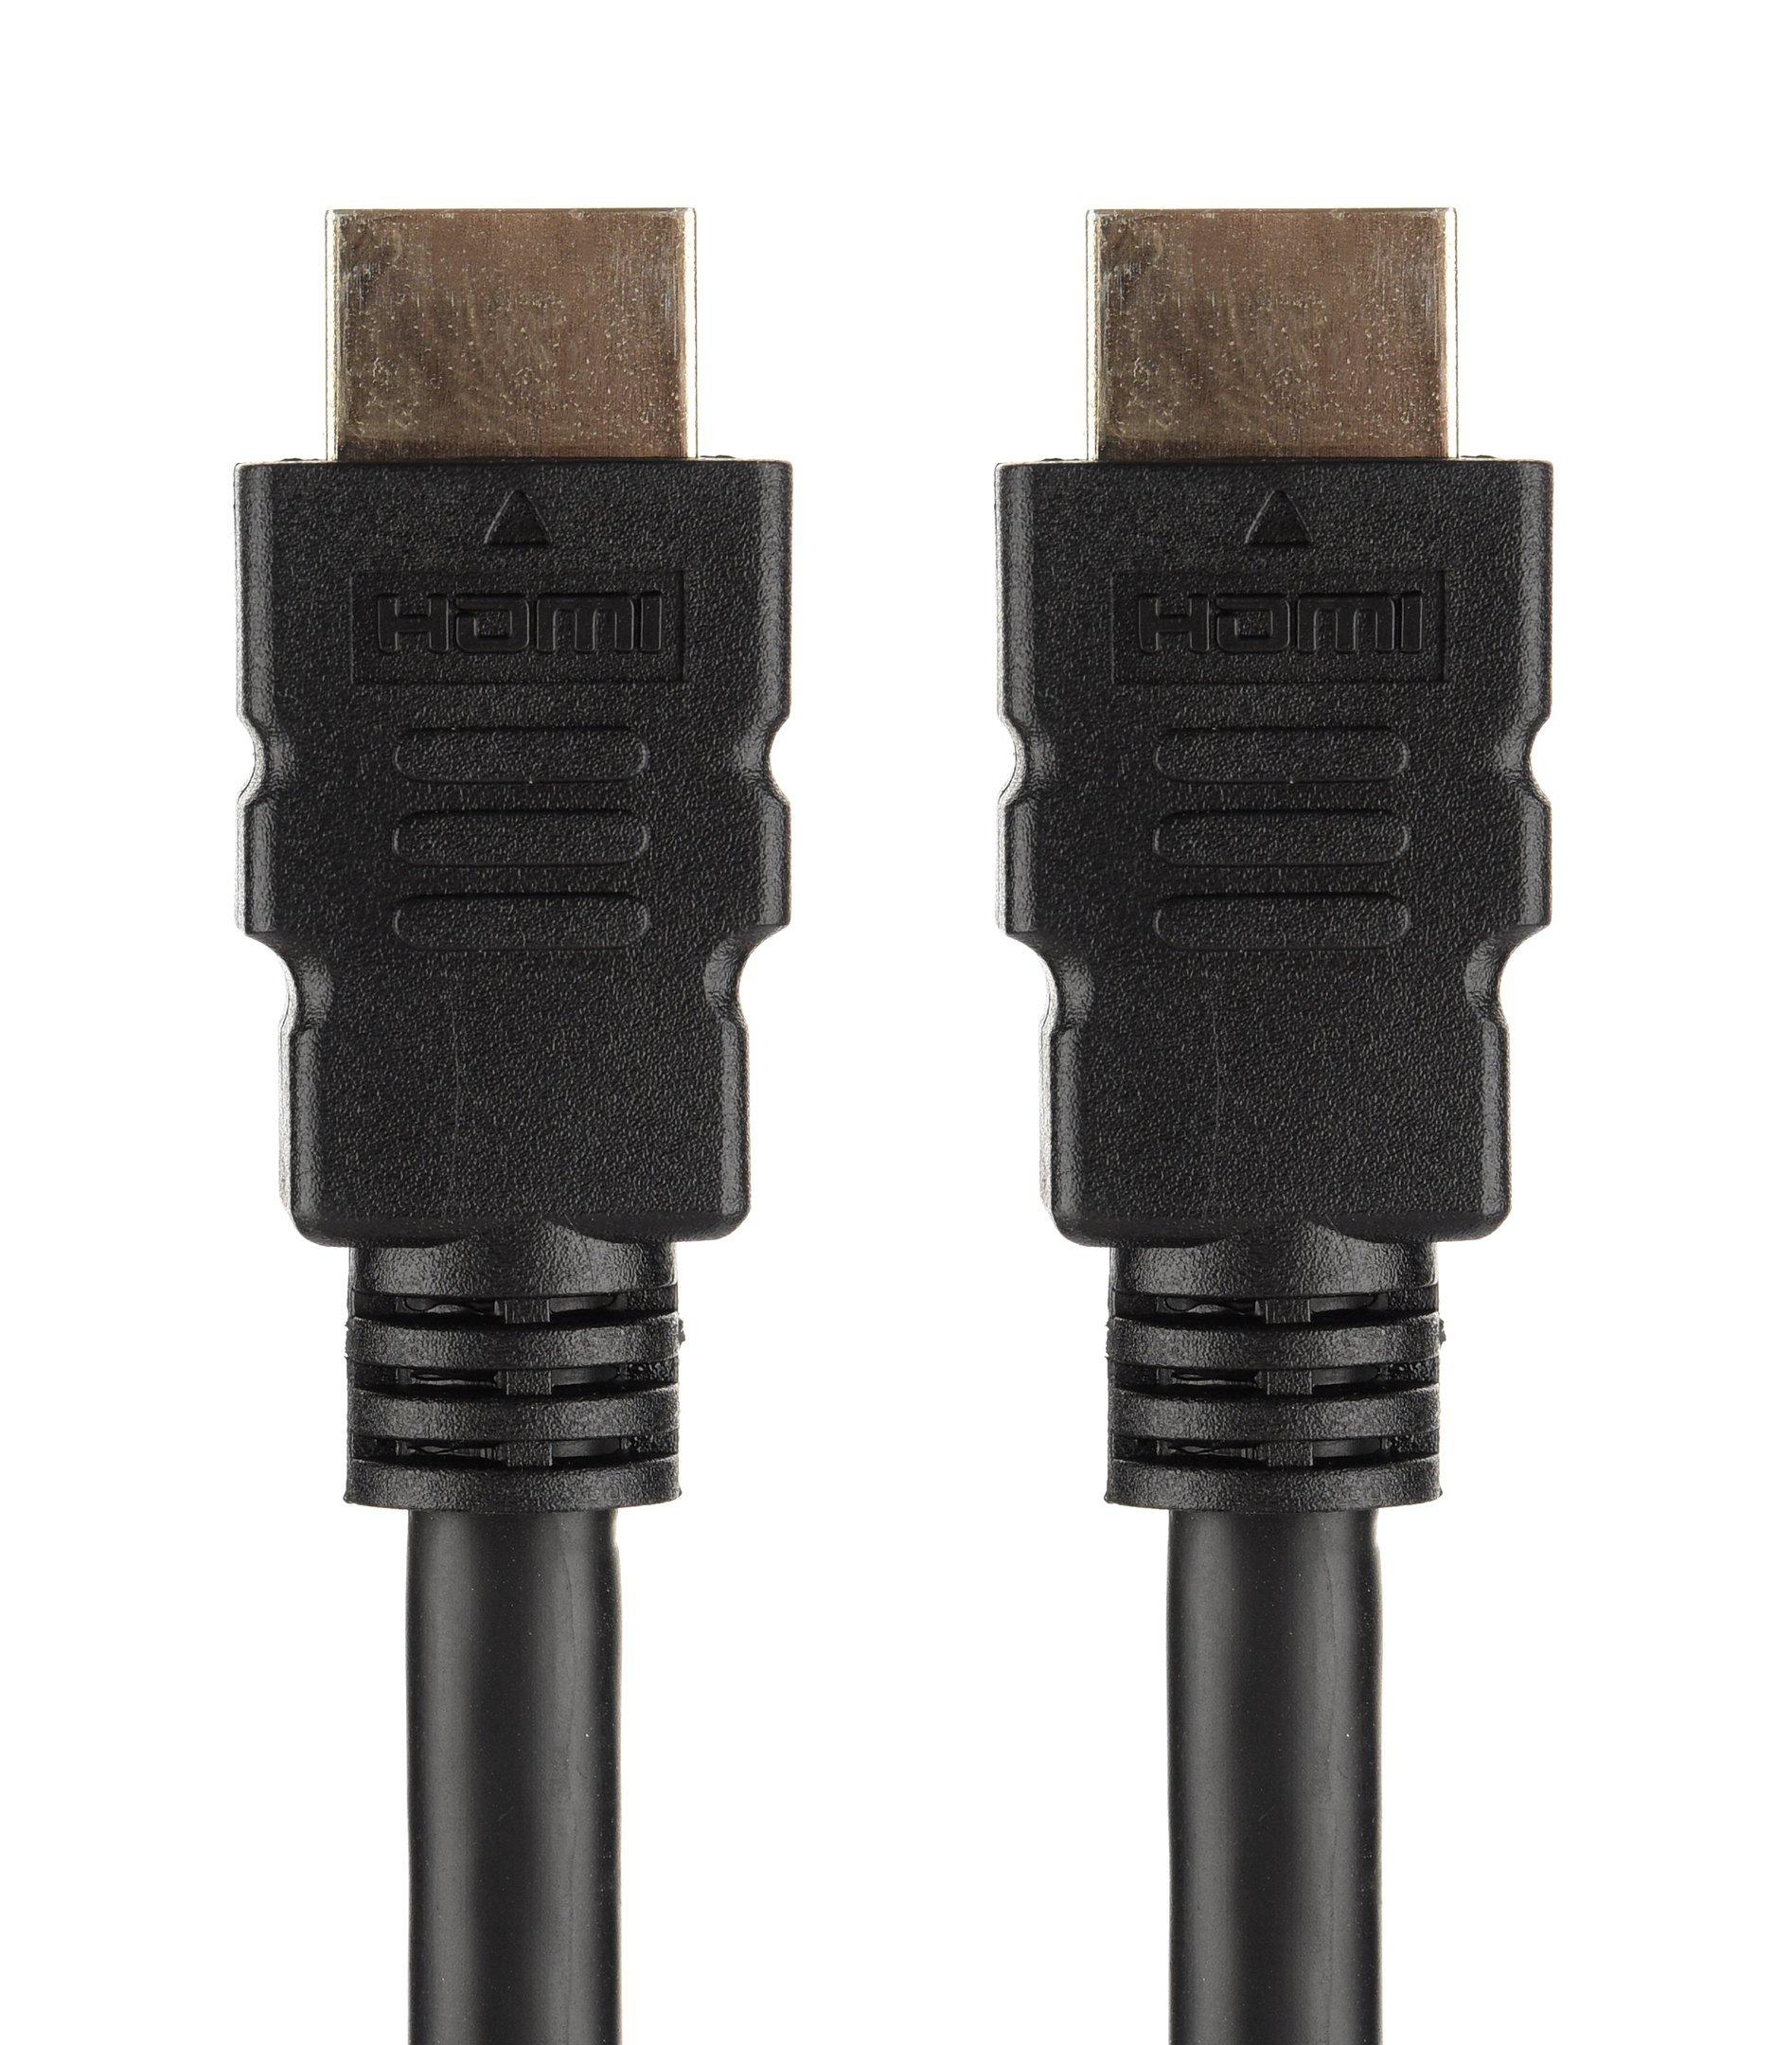 CABLE HDMI 10 METROS (COD: 13200057) - POWER ZONE